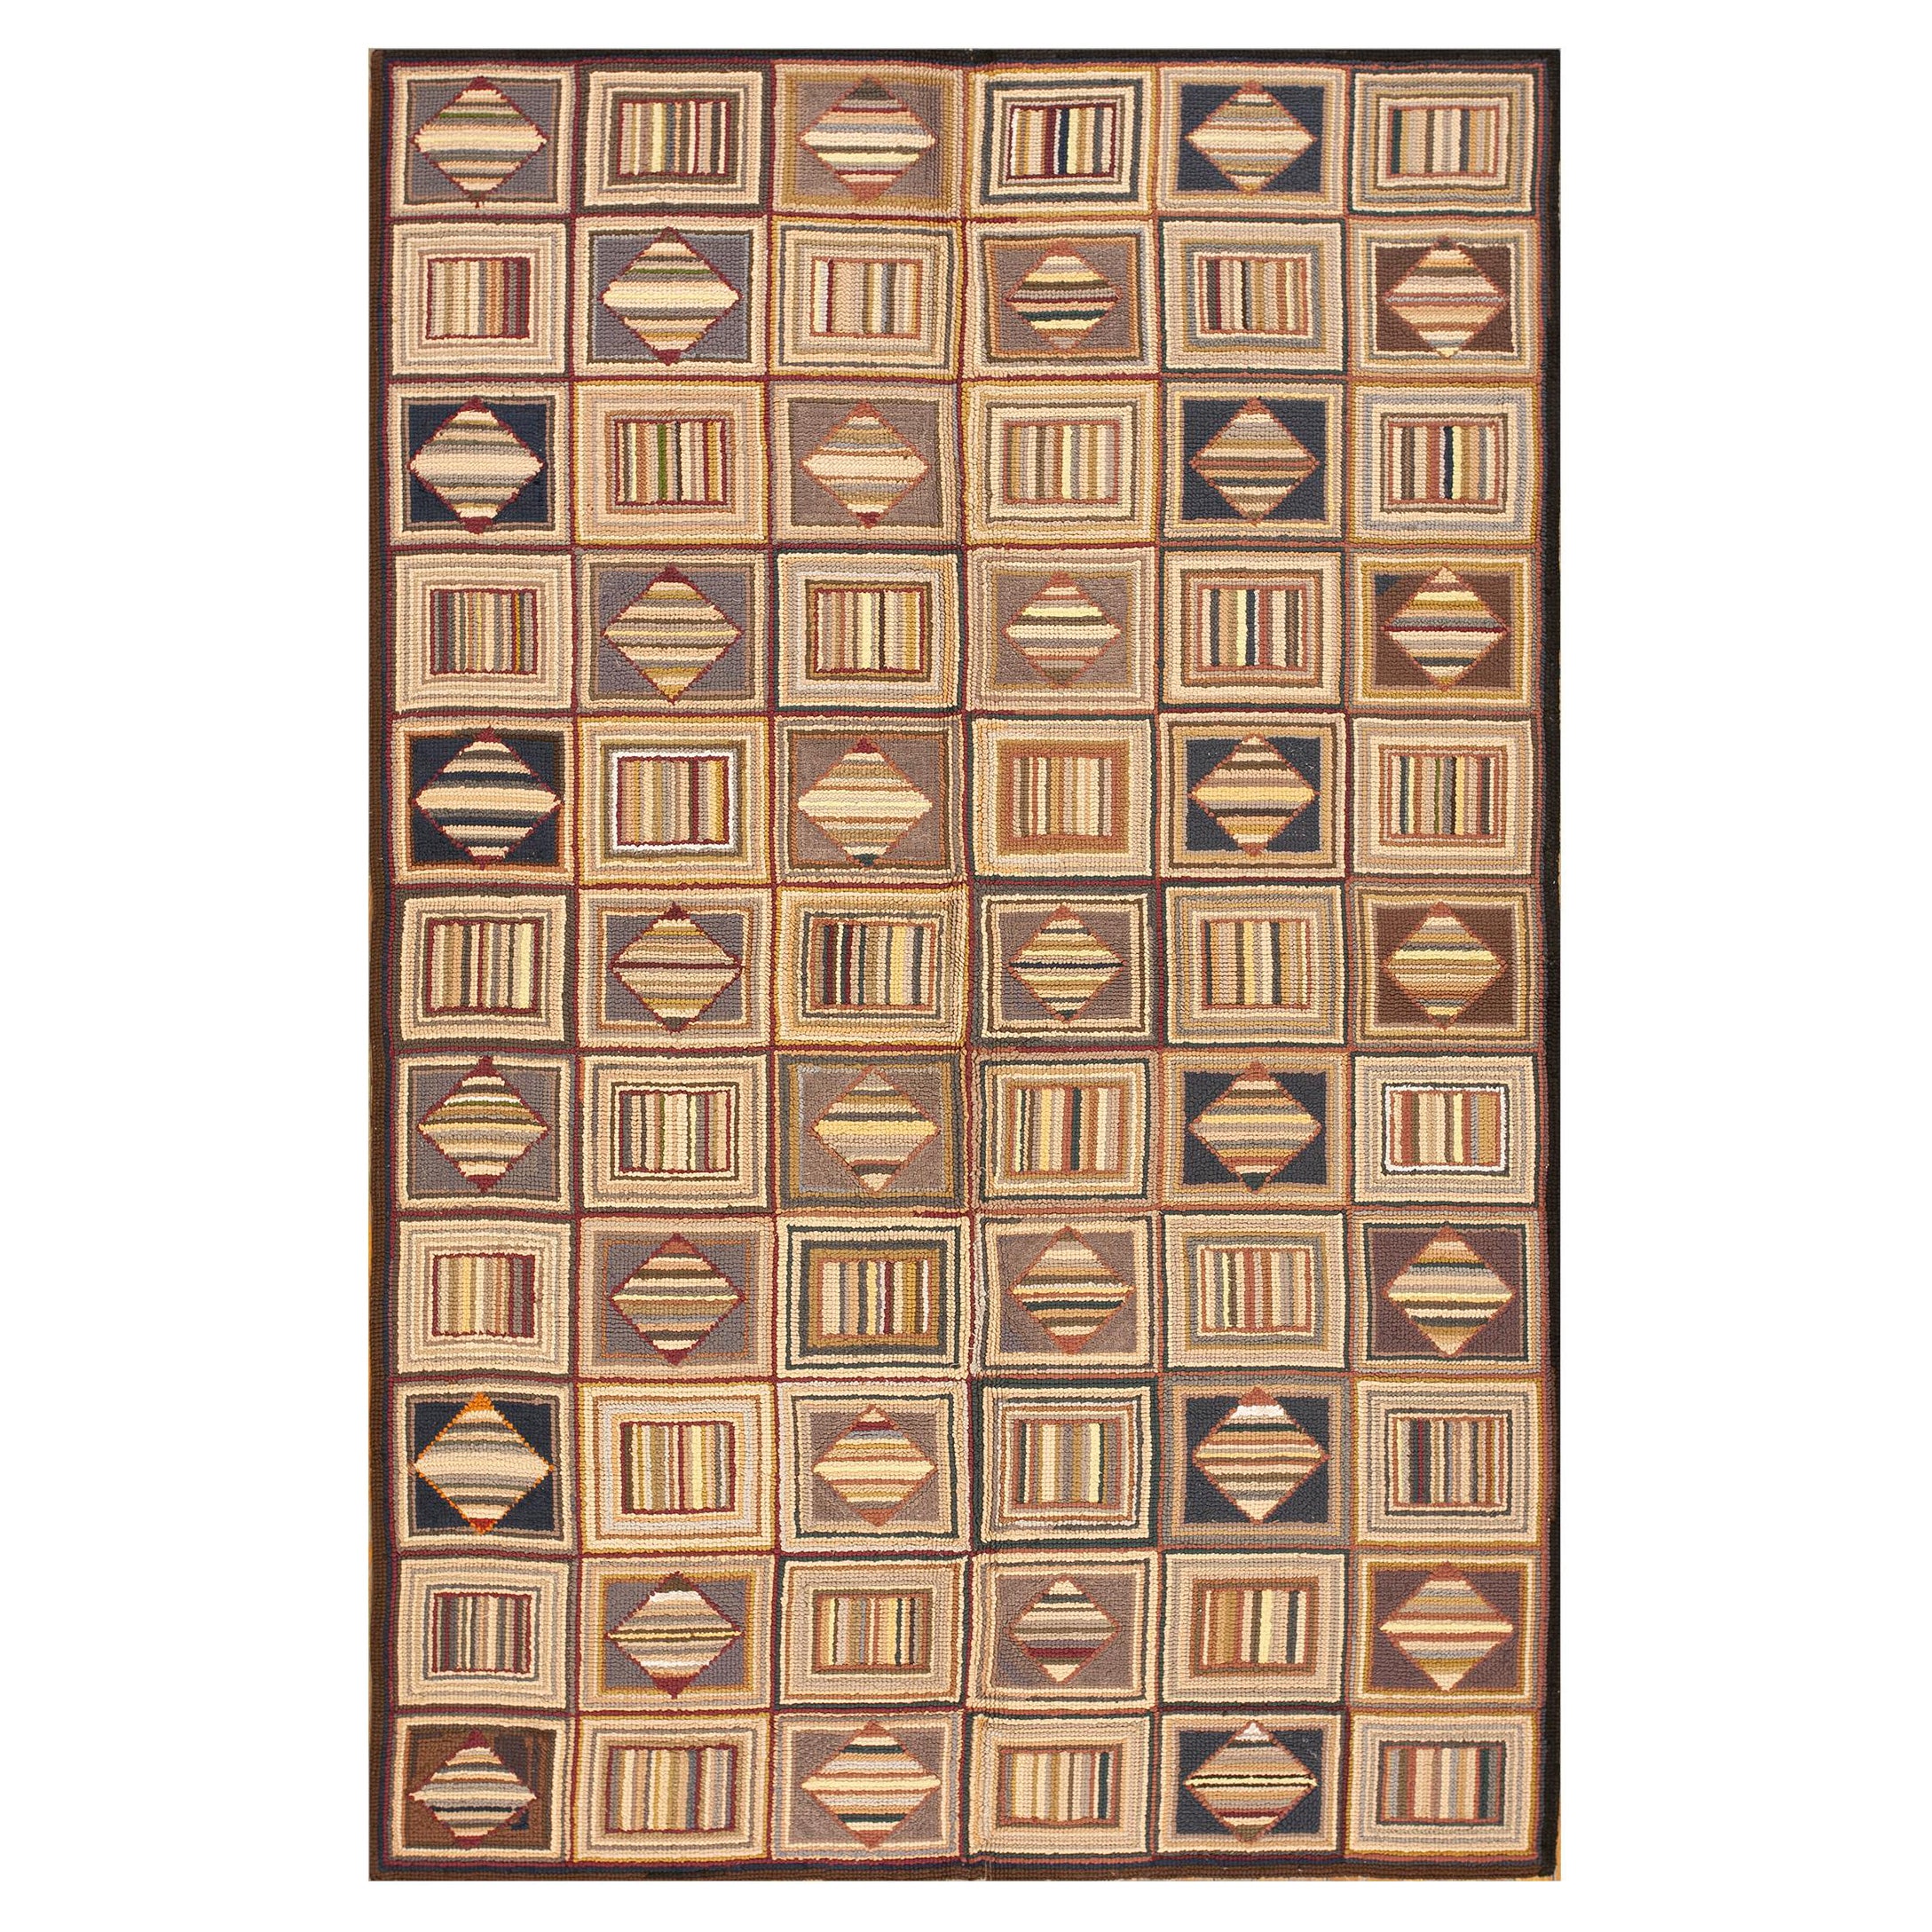 Mid 20th Century American Hooked Rug ( 6' x 8'7" - 183 x 262 )